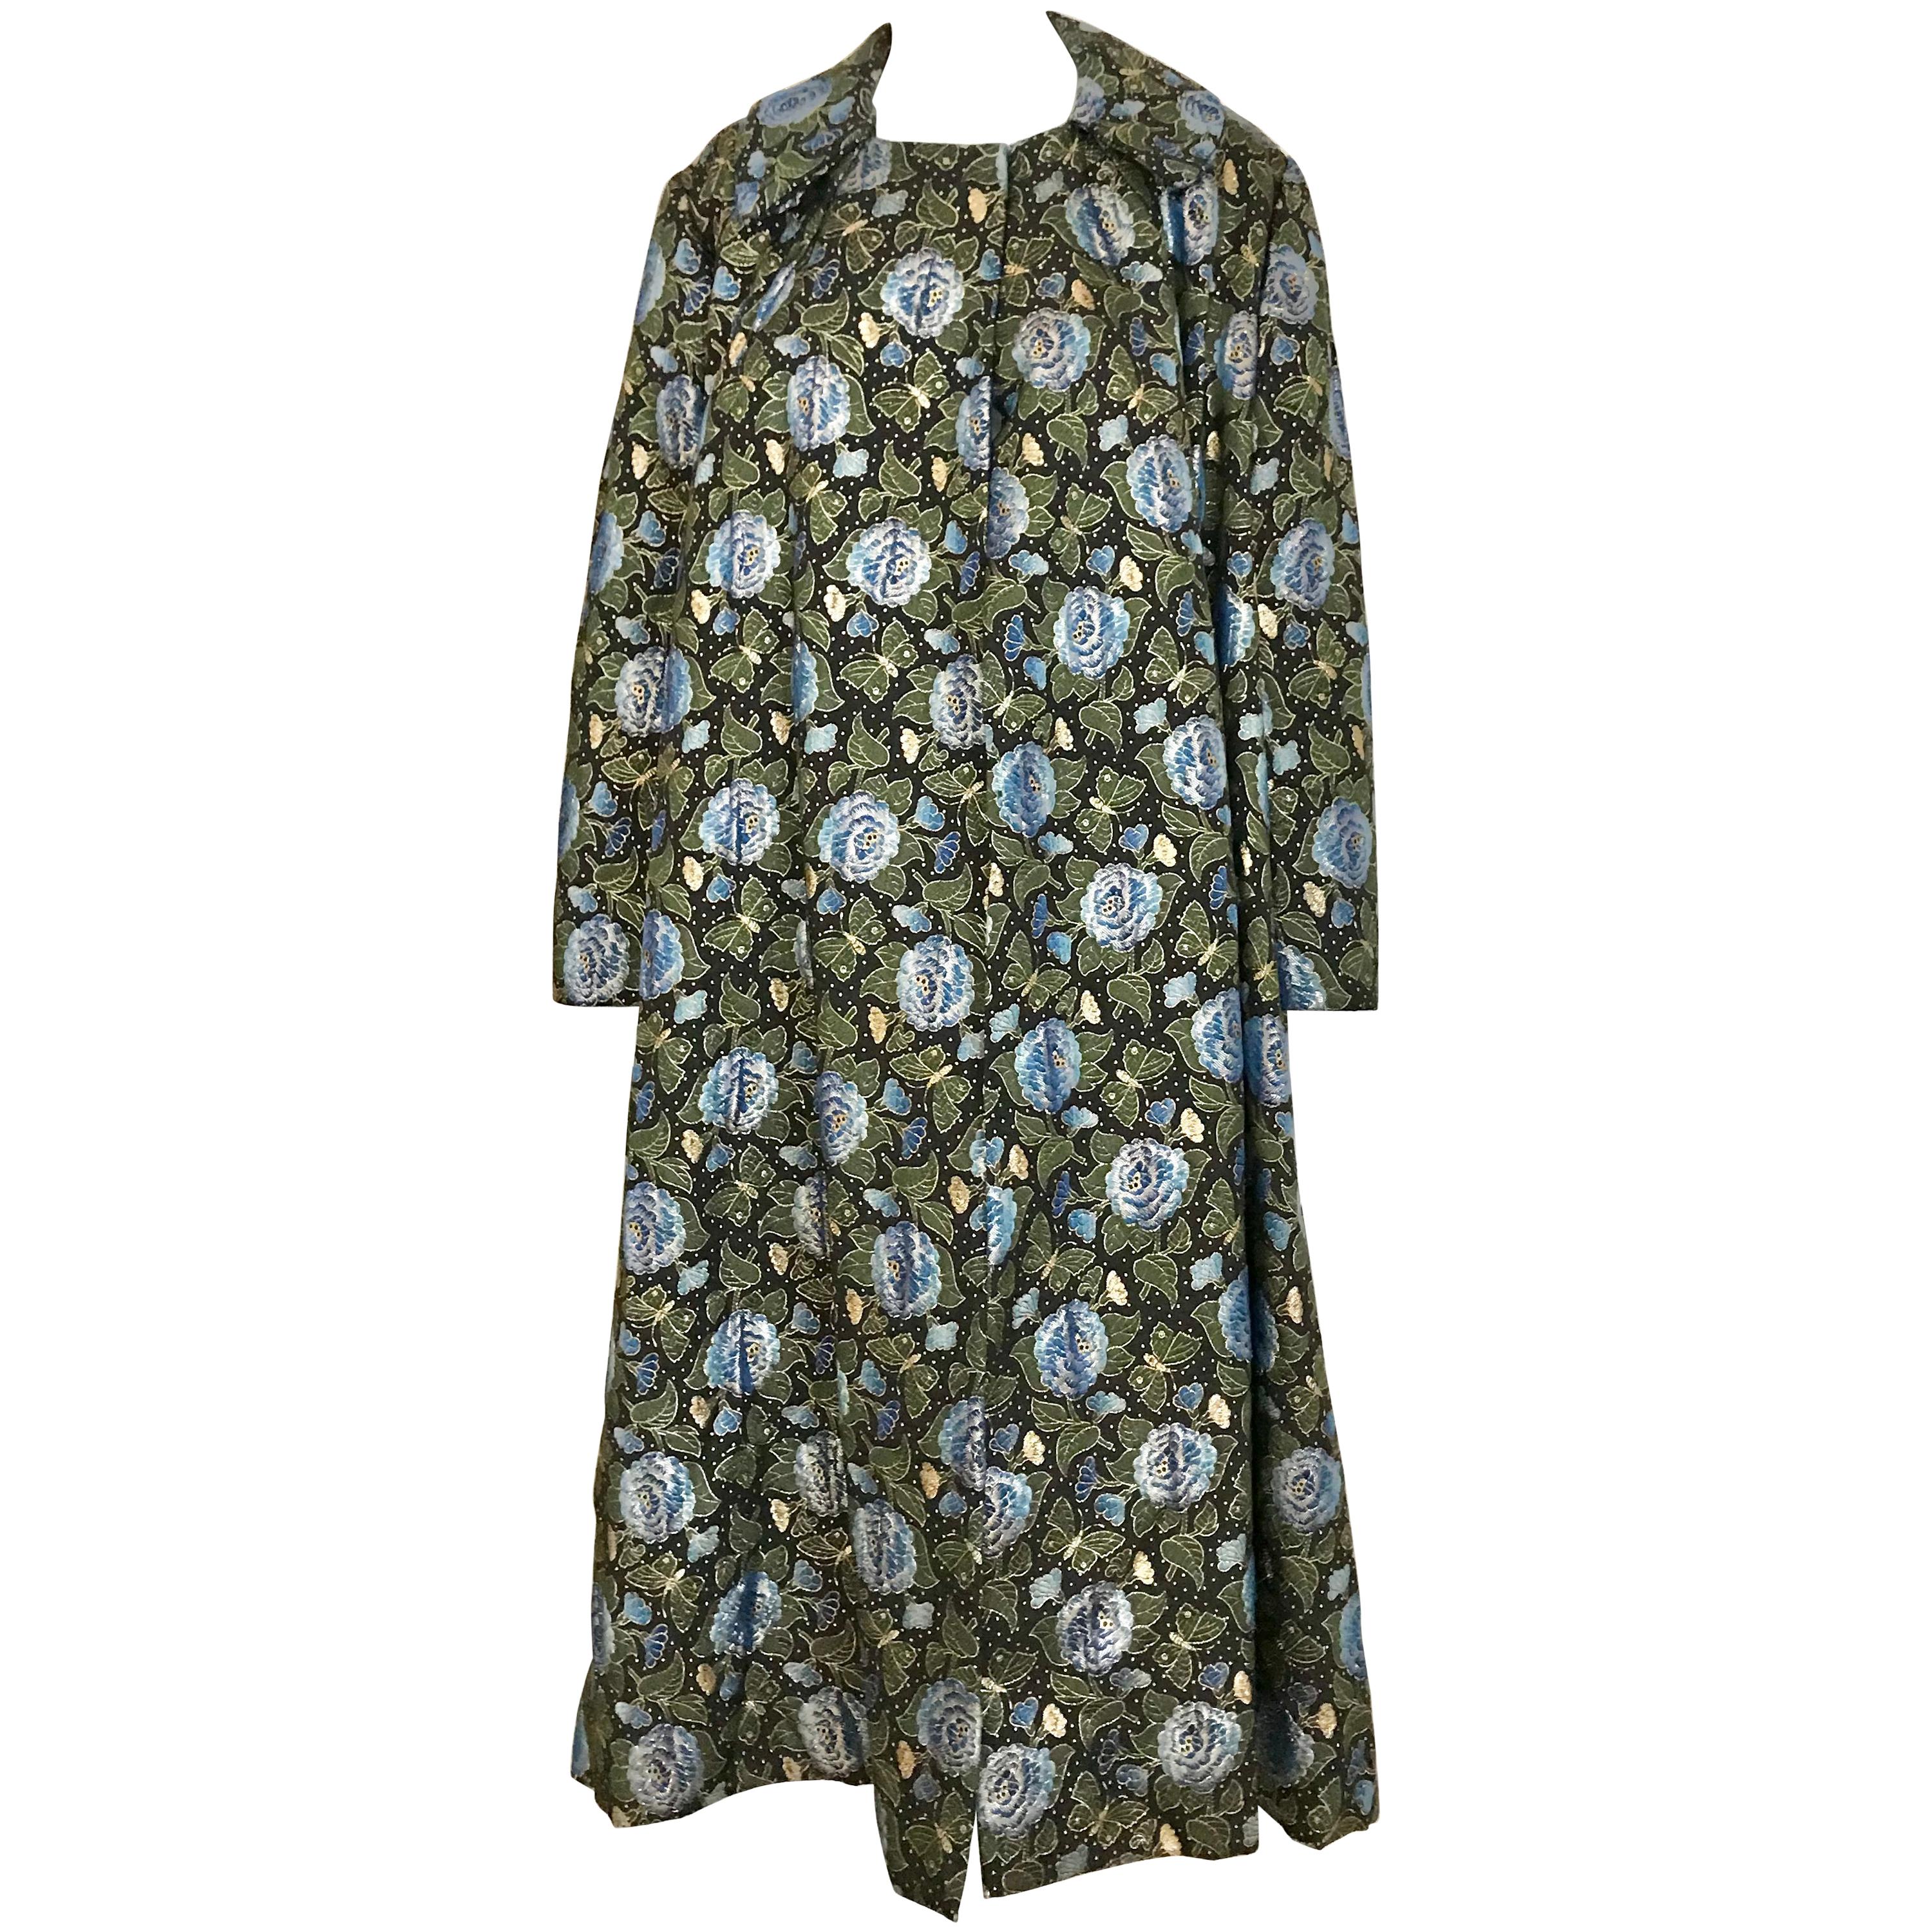  1950s Green and Blue Butterfly Print Brocade  Coat